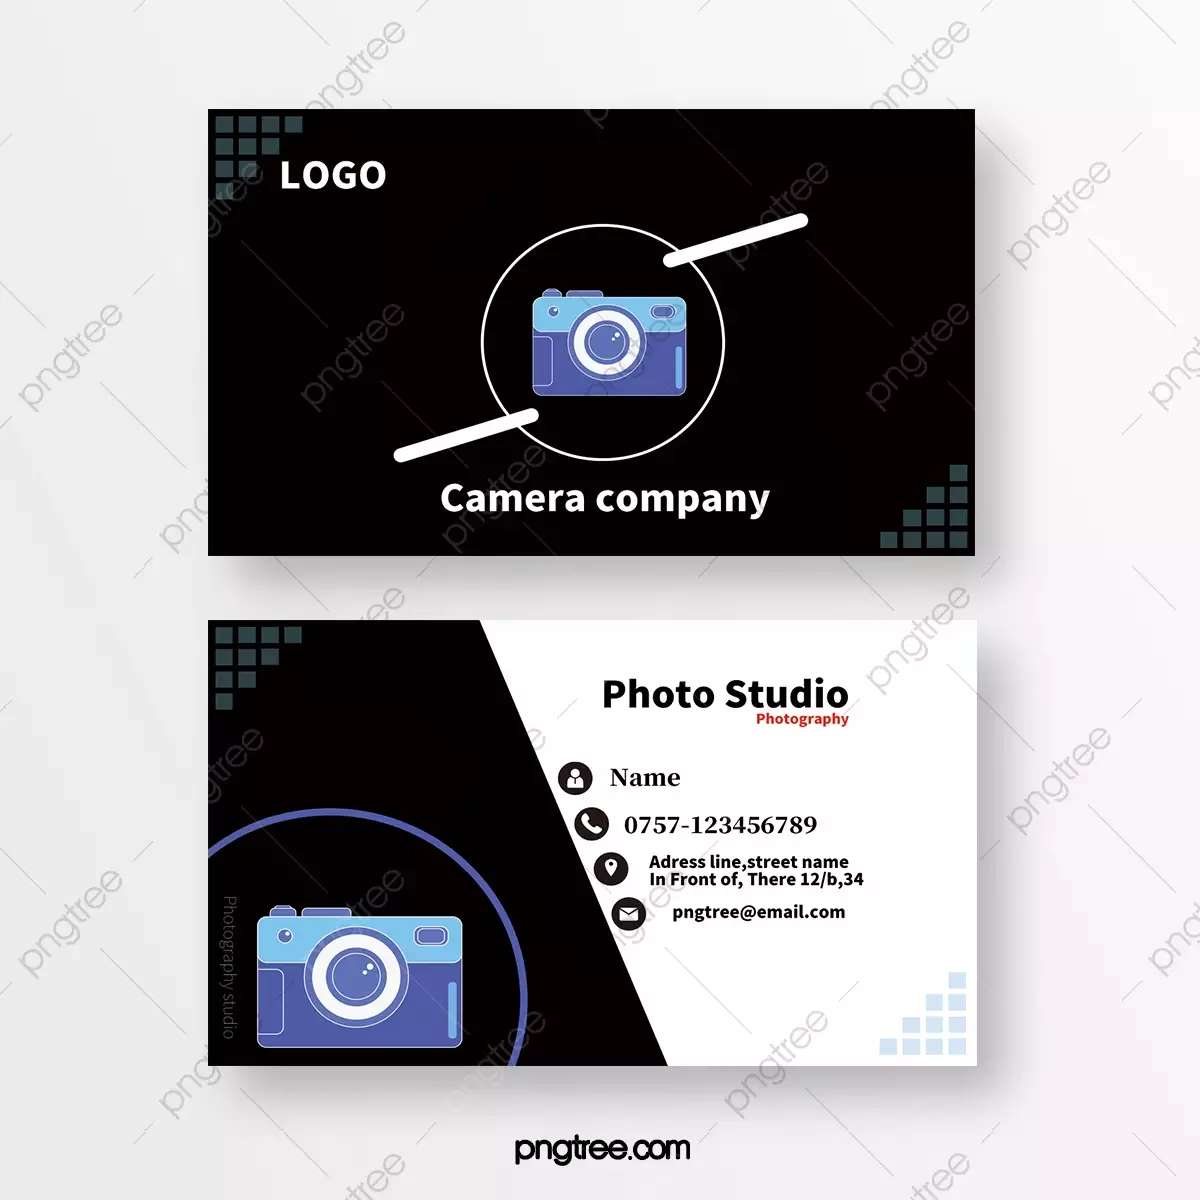 Business Card Templates For Photography Studios And Photographers Template Download on Pngtree